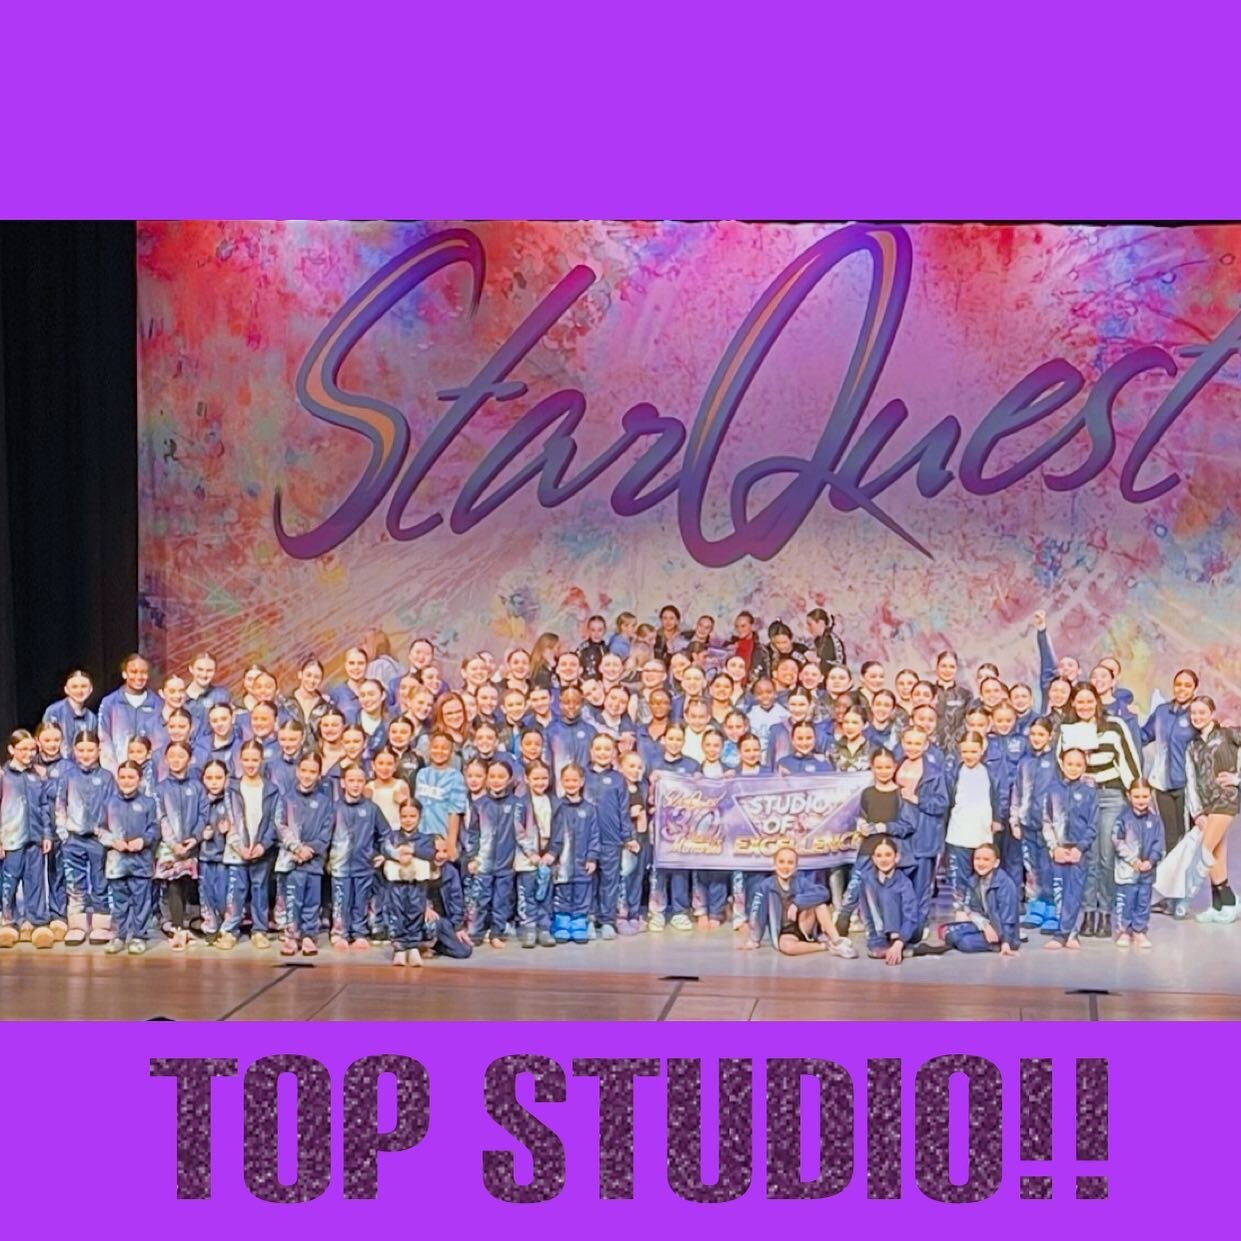 StarQuest Top Studio Winner!! 

*Check out our full competition results on our Facebook page! 

#edgestudioofdance